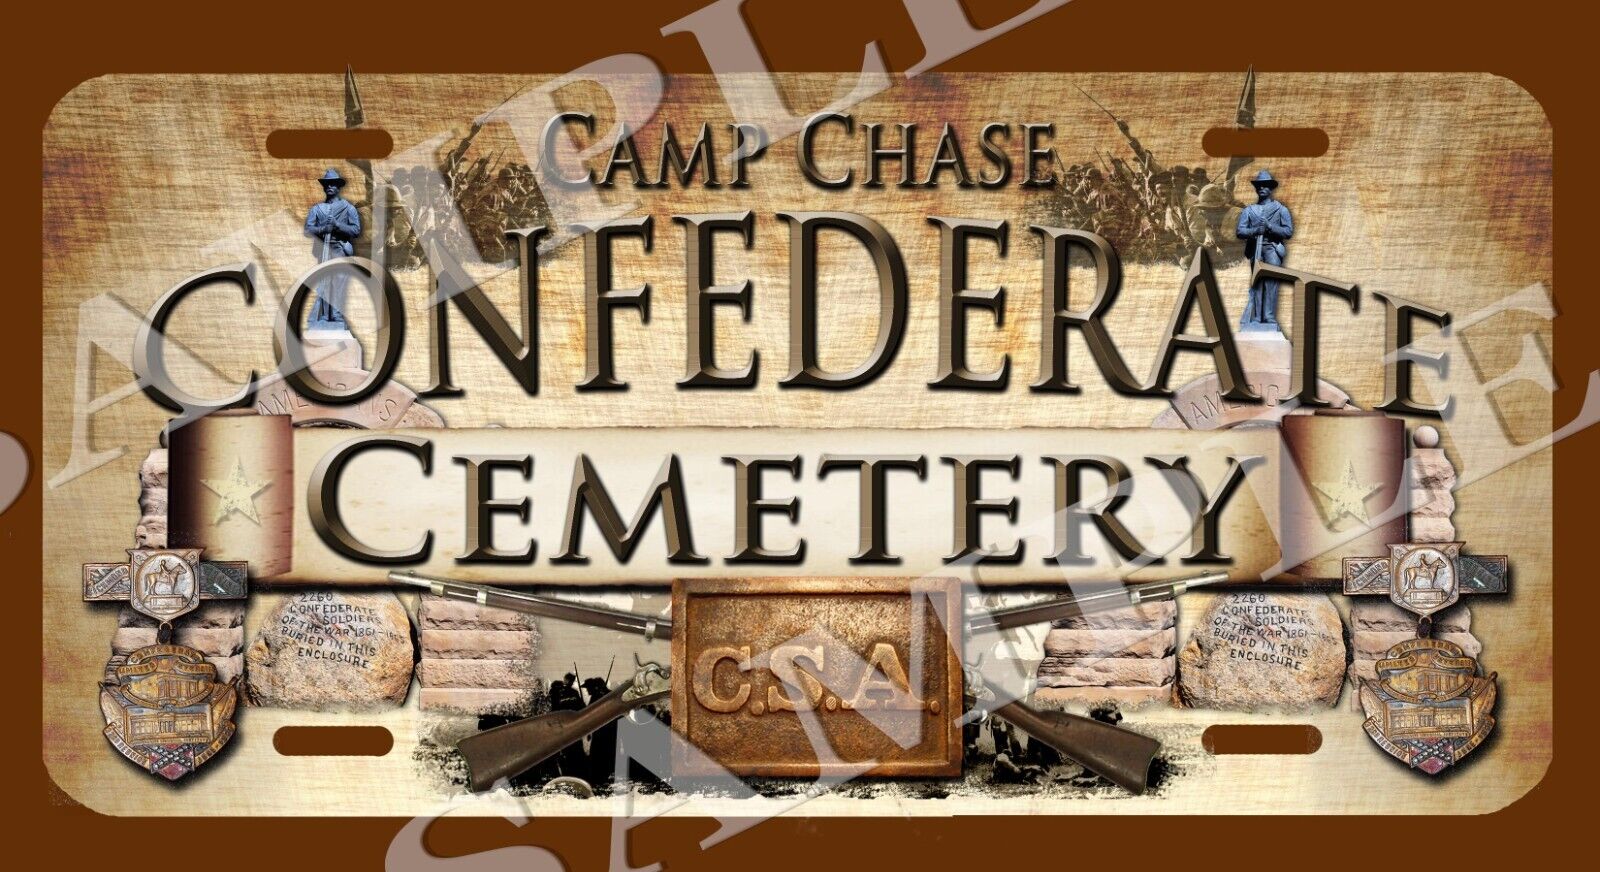 Camp Chase Confederate Cemetery American Civil War Themed vehicle license plate